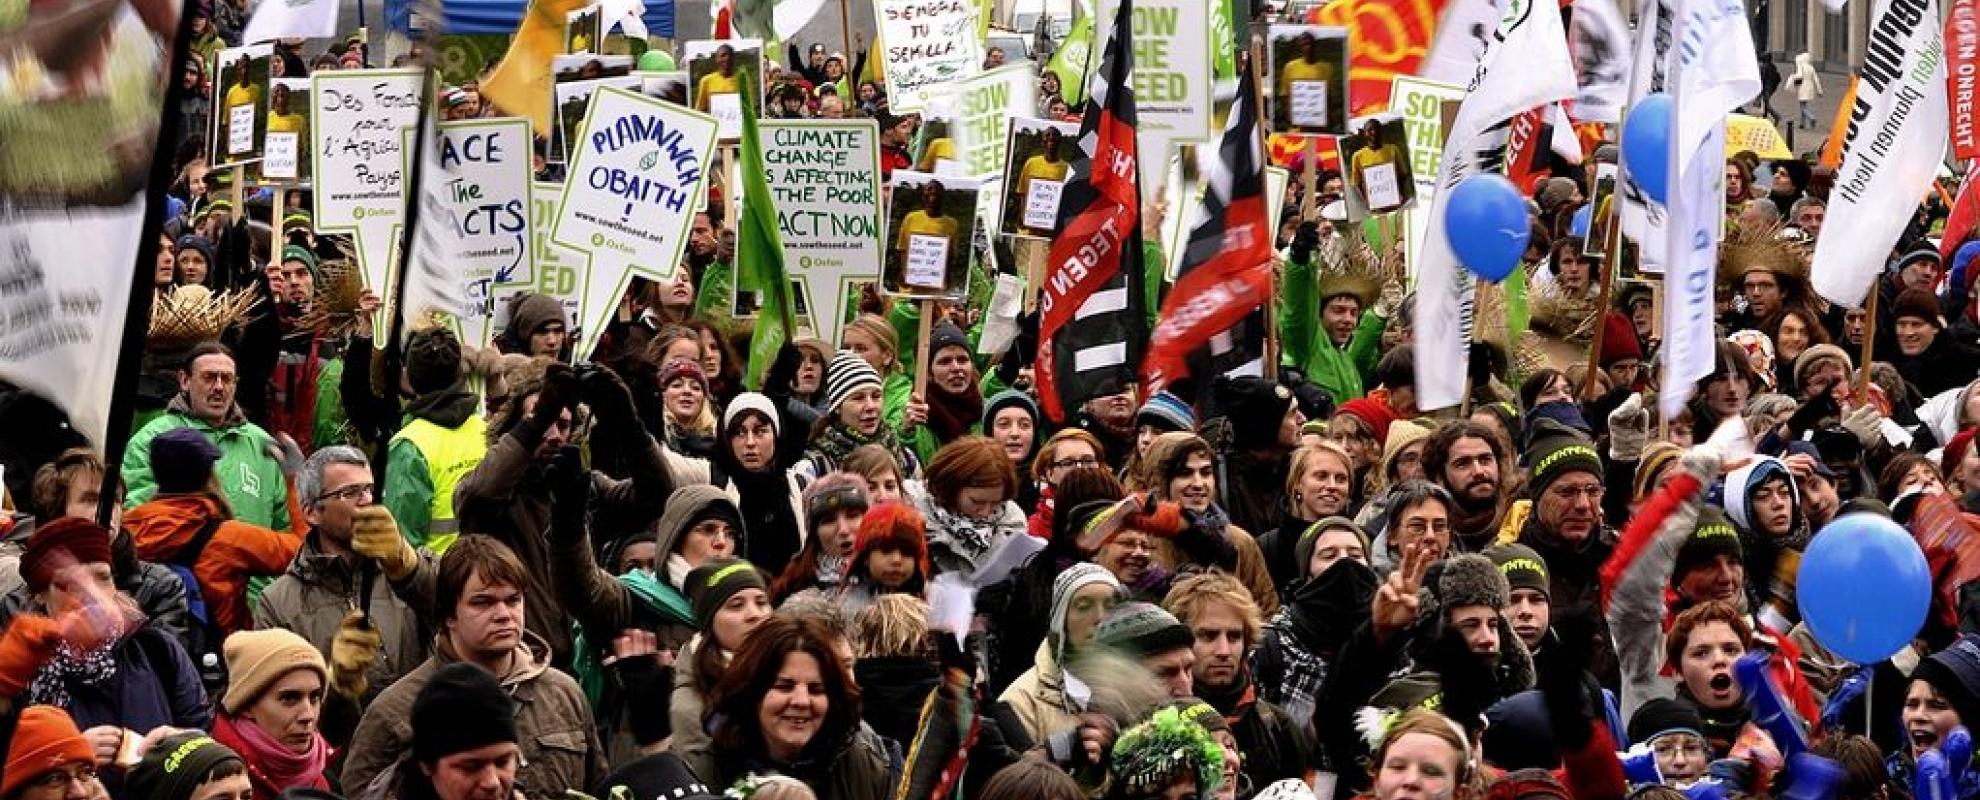 Sing for the climate in 2012